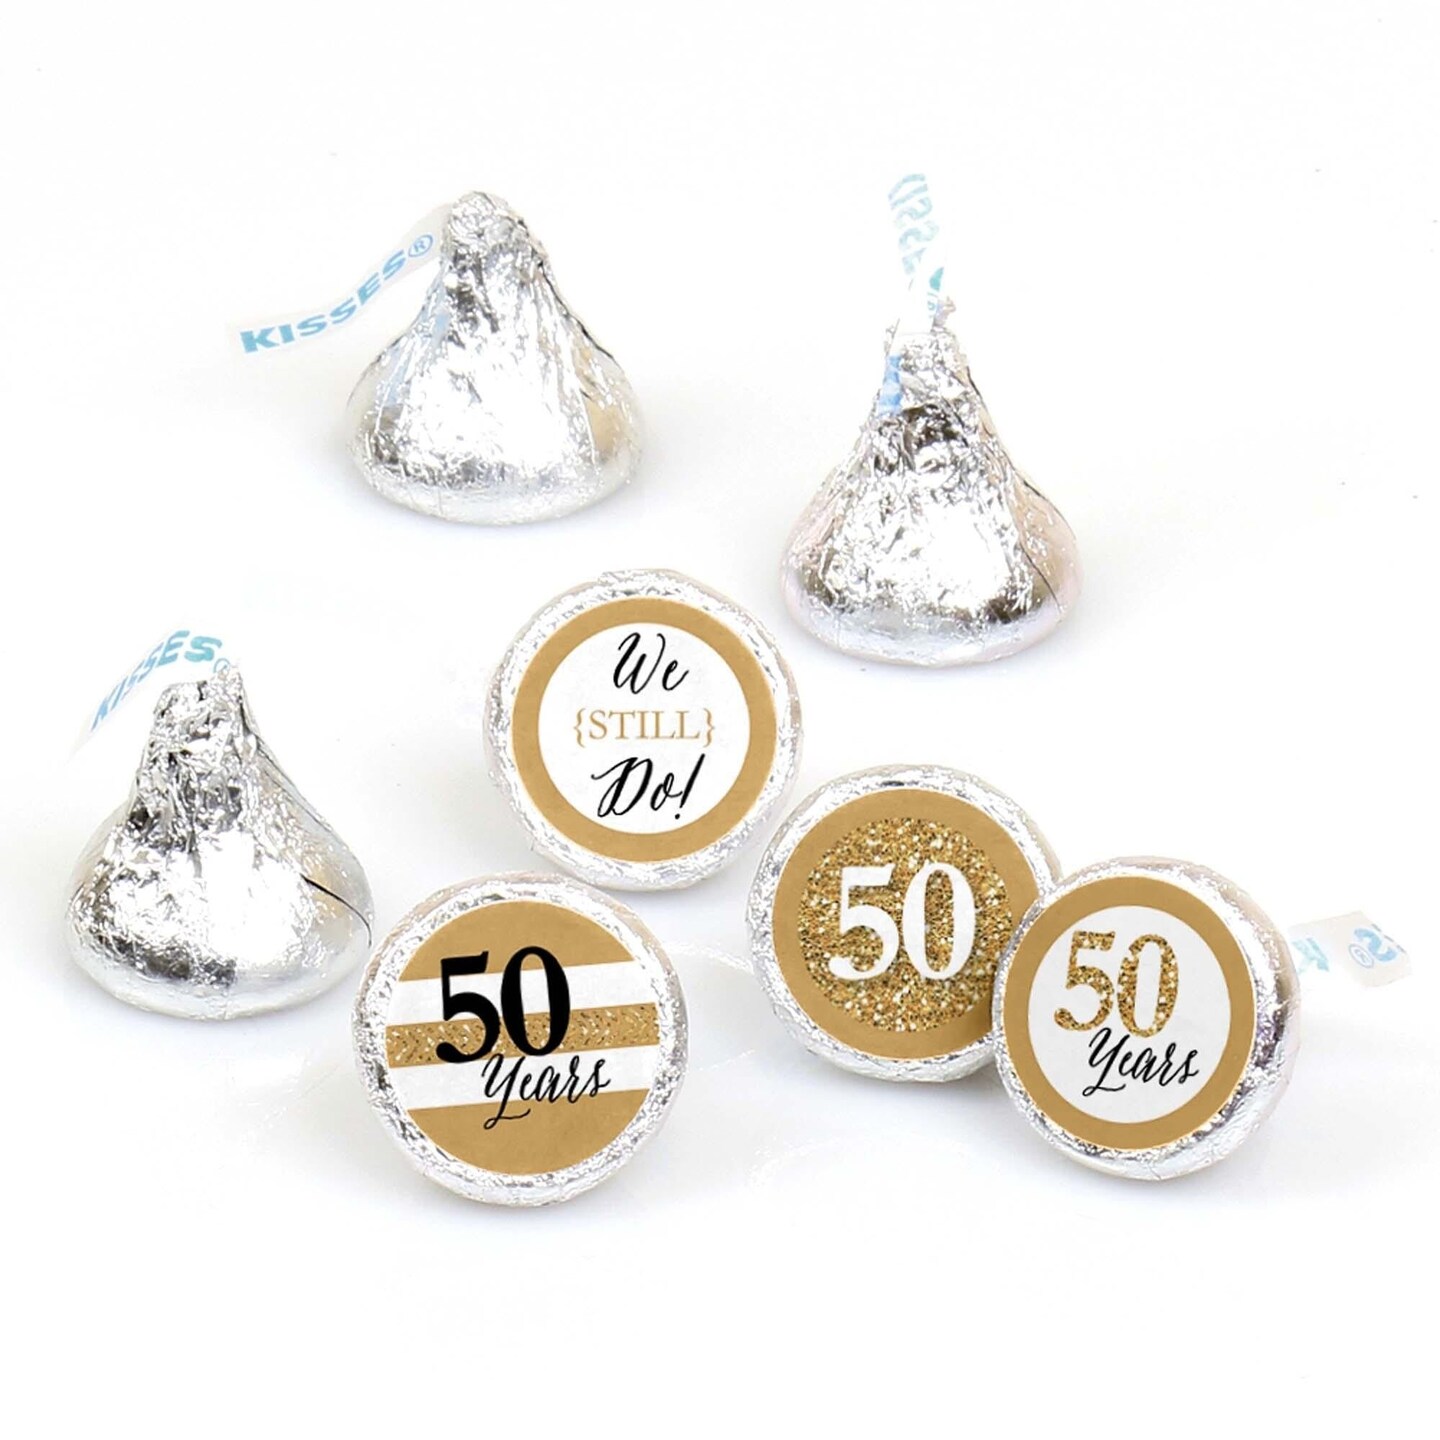 Big Dot of Happiness We Still Do - 50th Wedding Anniversary - Party Round Candy Sticker Favors - Labels Fits Chocolate Candy (1 sheet of 108)